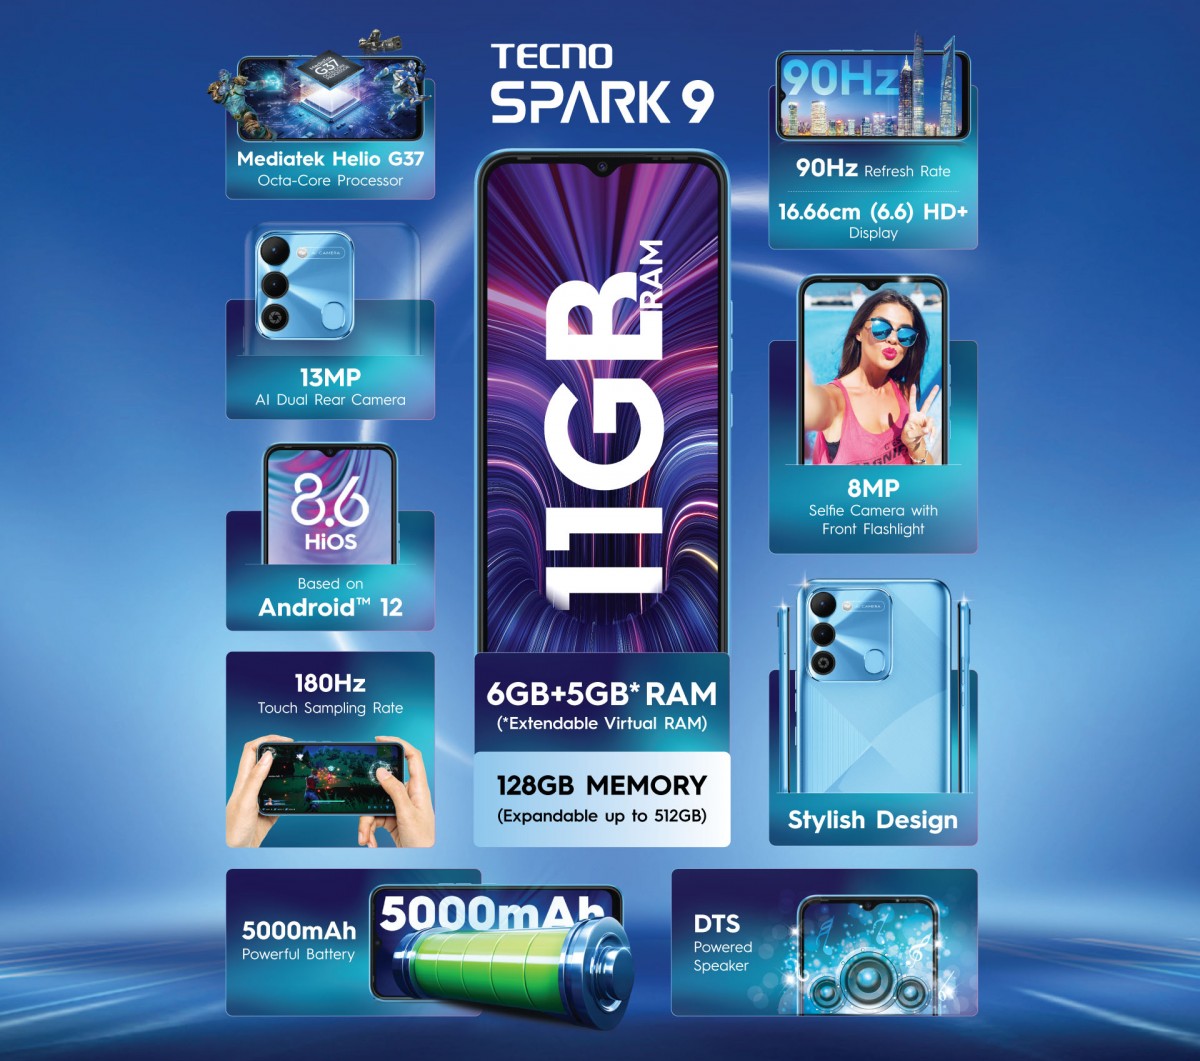 Tecno Spark 9 goes official in India: Helio G37, 6.6'' 90Hz display and a low price